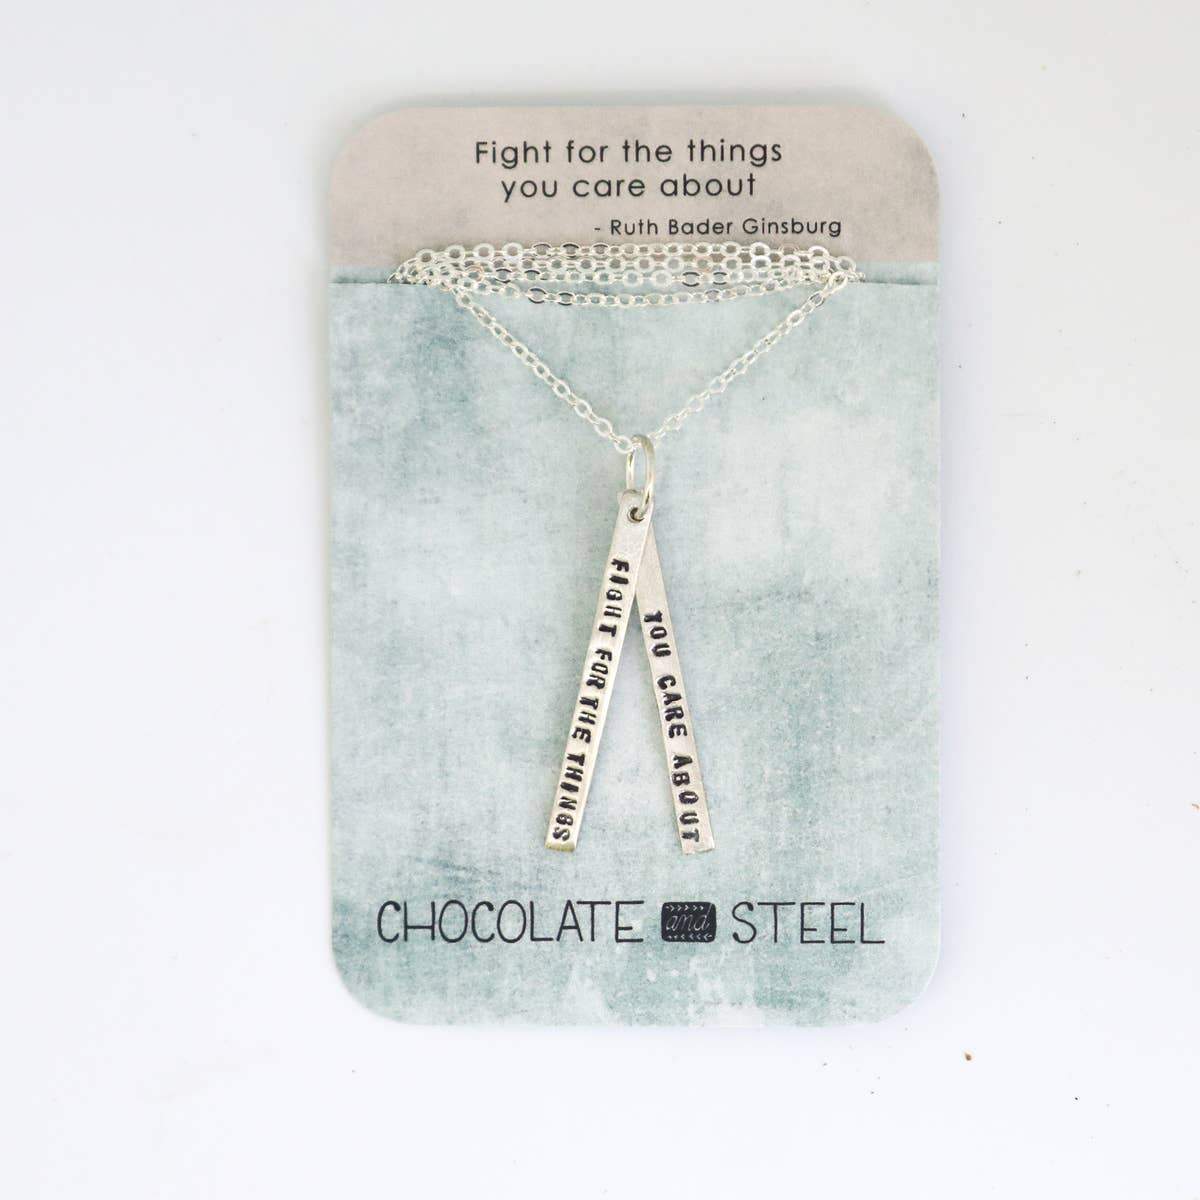 Chocolate and Steel Necklaces Ruth Bader Ginsburg Quote Necklace: "Fight for the things you care about" - Sterling Silver or Gold